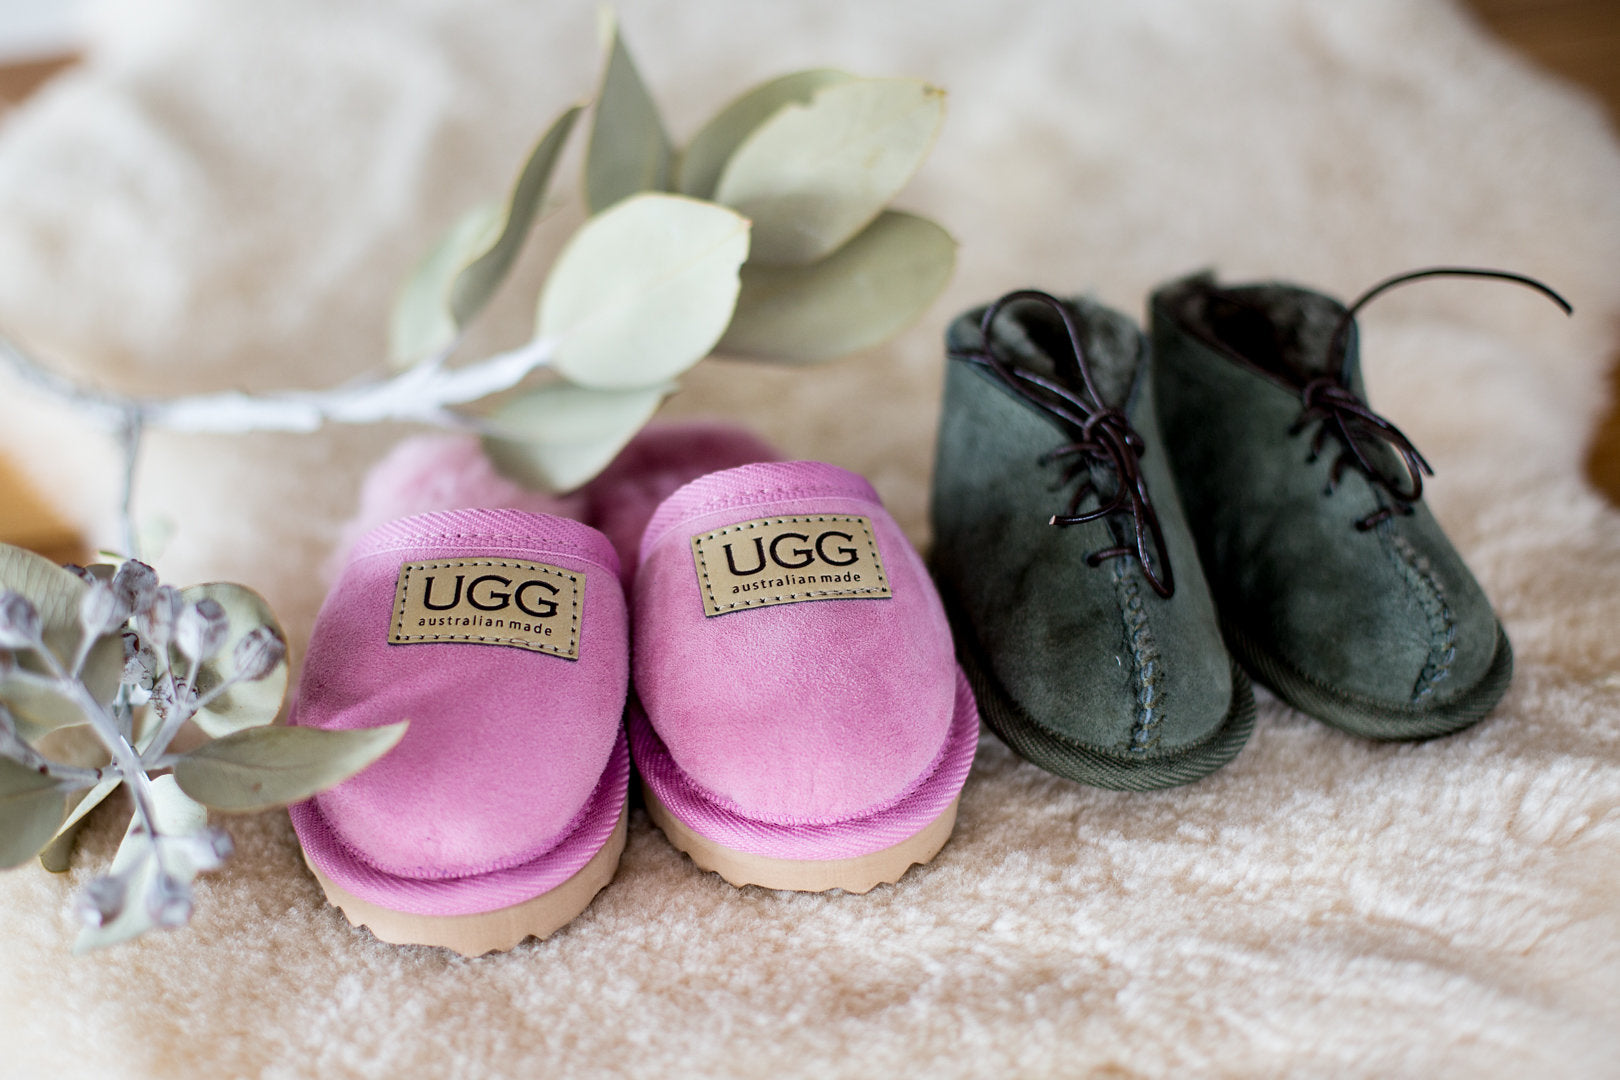 ugg made in australia or china